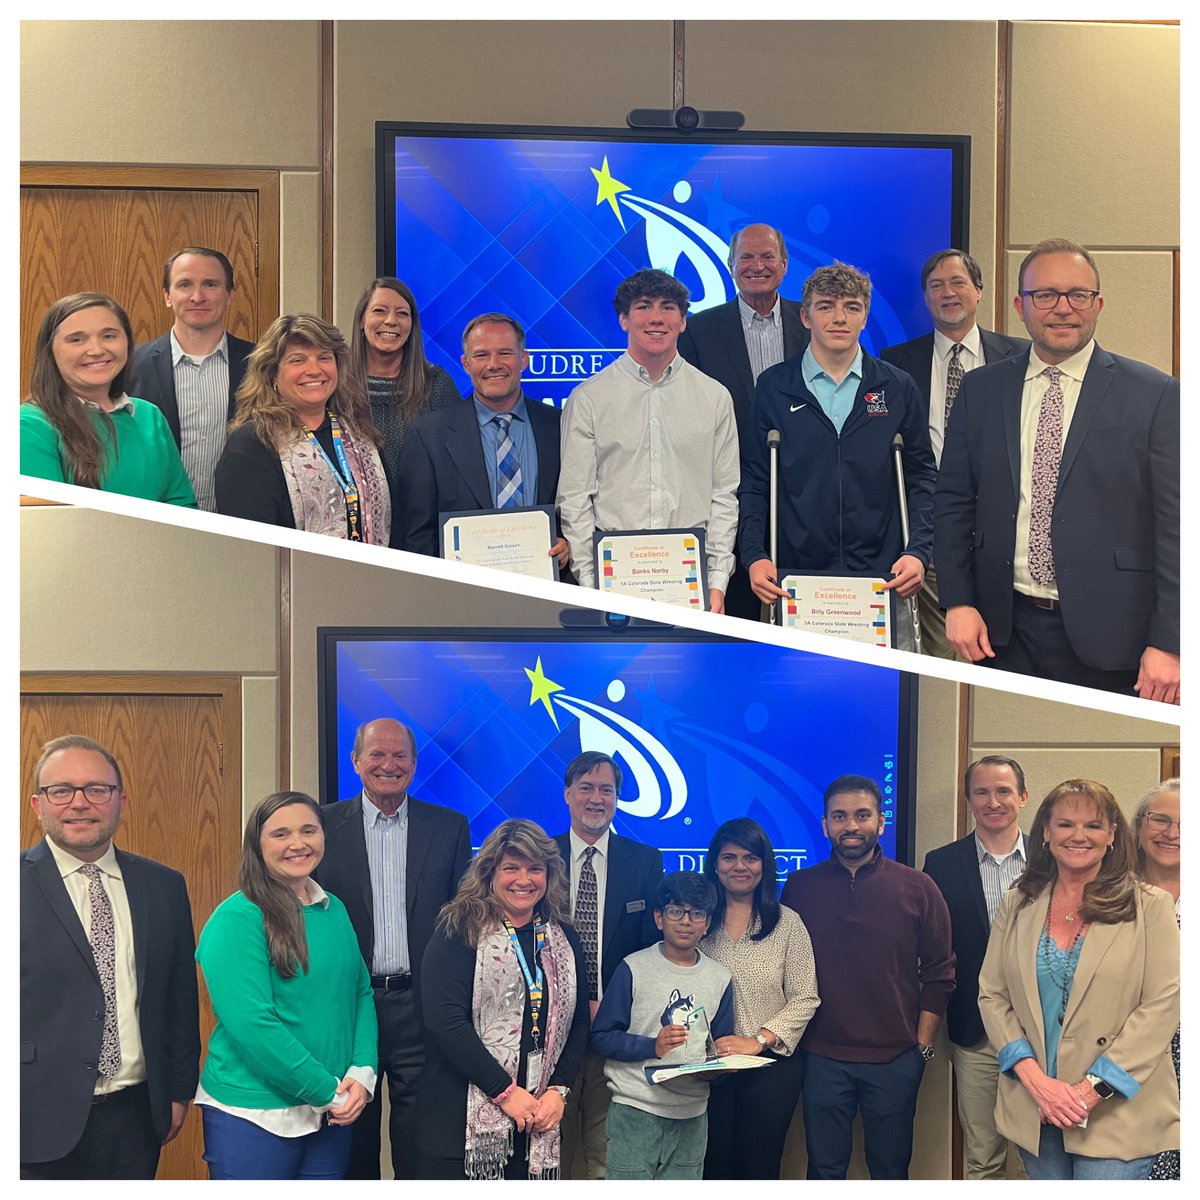 Wow, wow, wow! At tonight’s board meeting, we recognized Billy & Banks, Poudre High students & 5A #Colorado state wrestling champs (top middle); PHS’ Barrett Golyer, 5A Coach of the Year (top middle left); and Traut Elementary’s Nikhil, PSD’s district spelling bee champ! 🏆 🐝